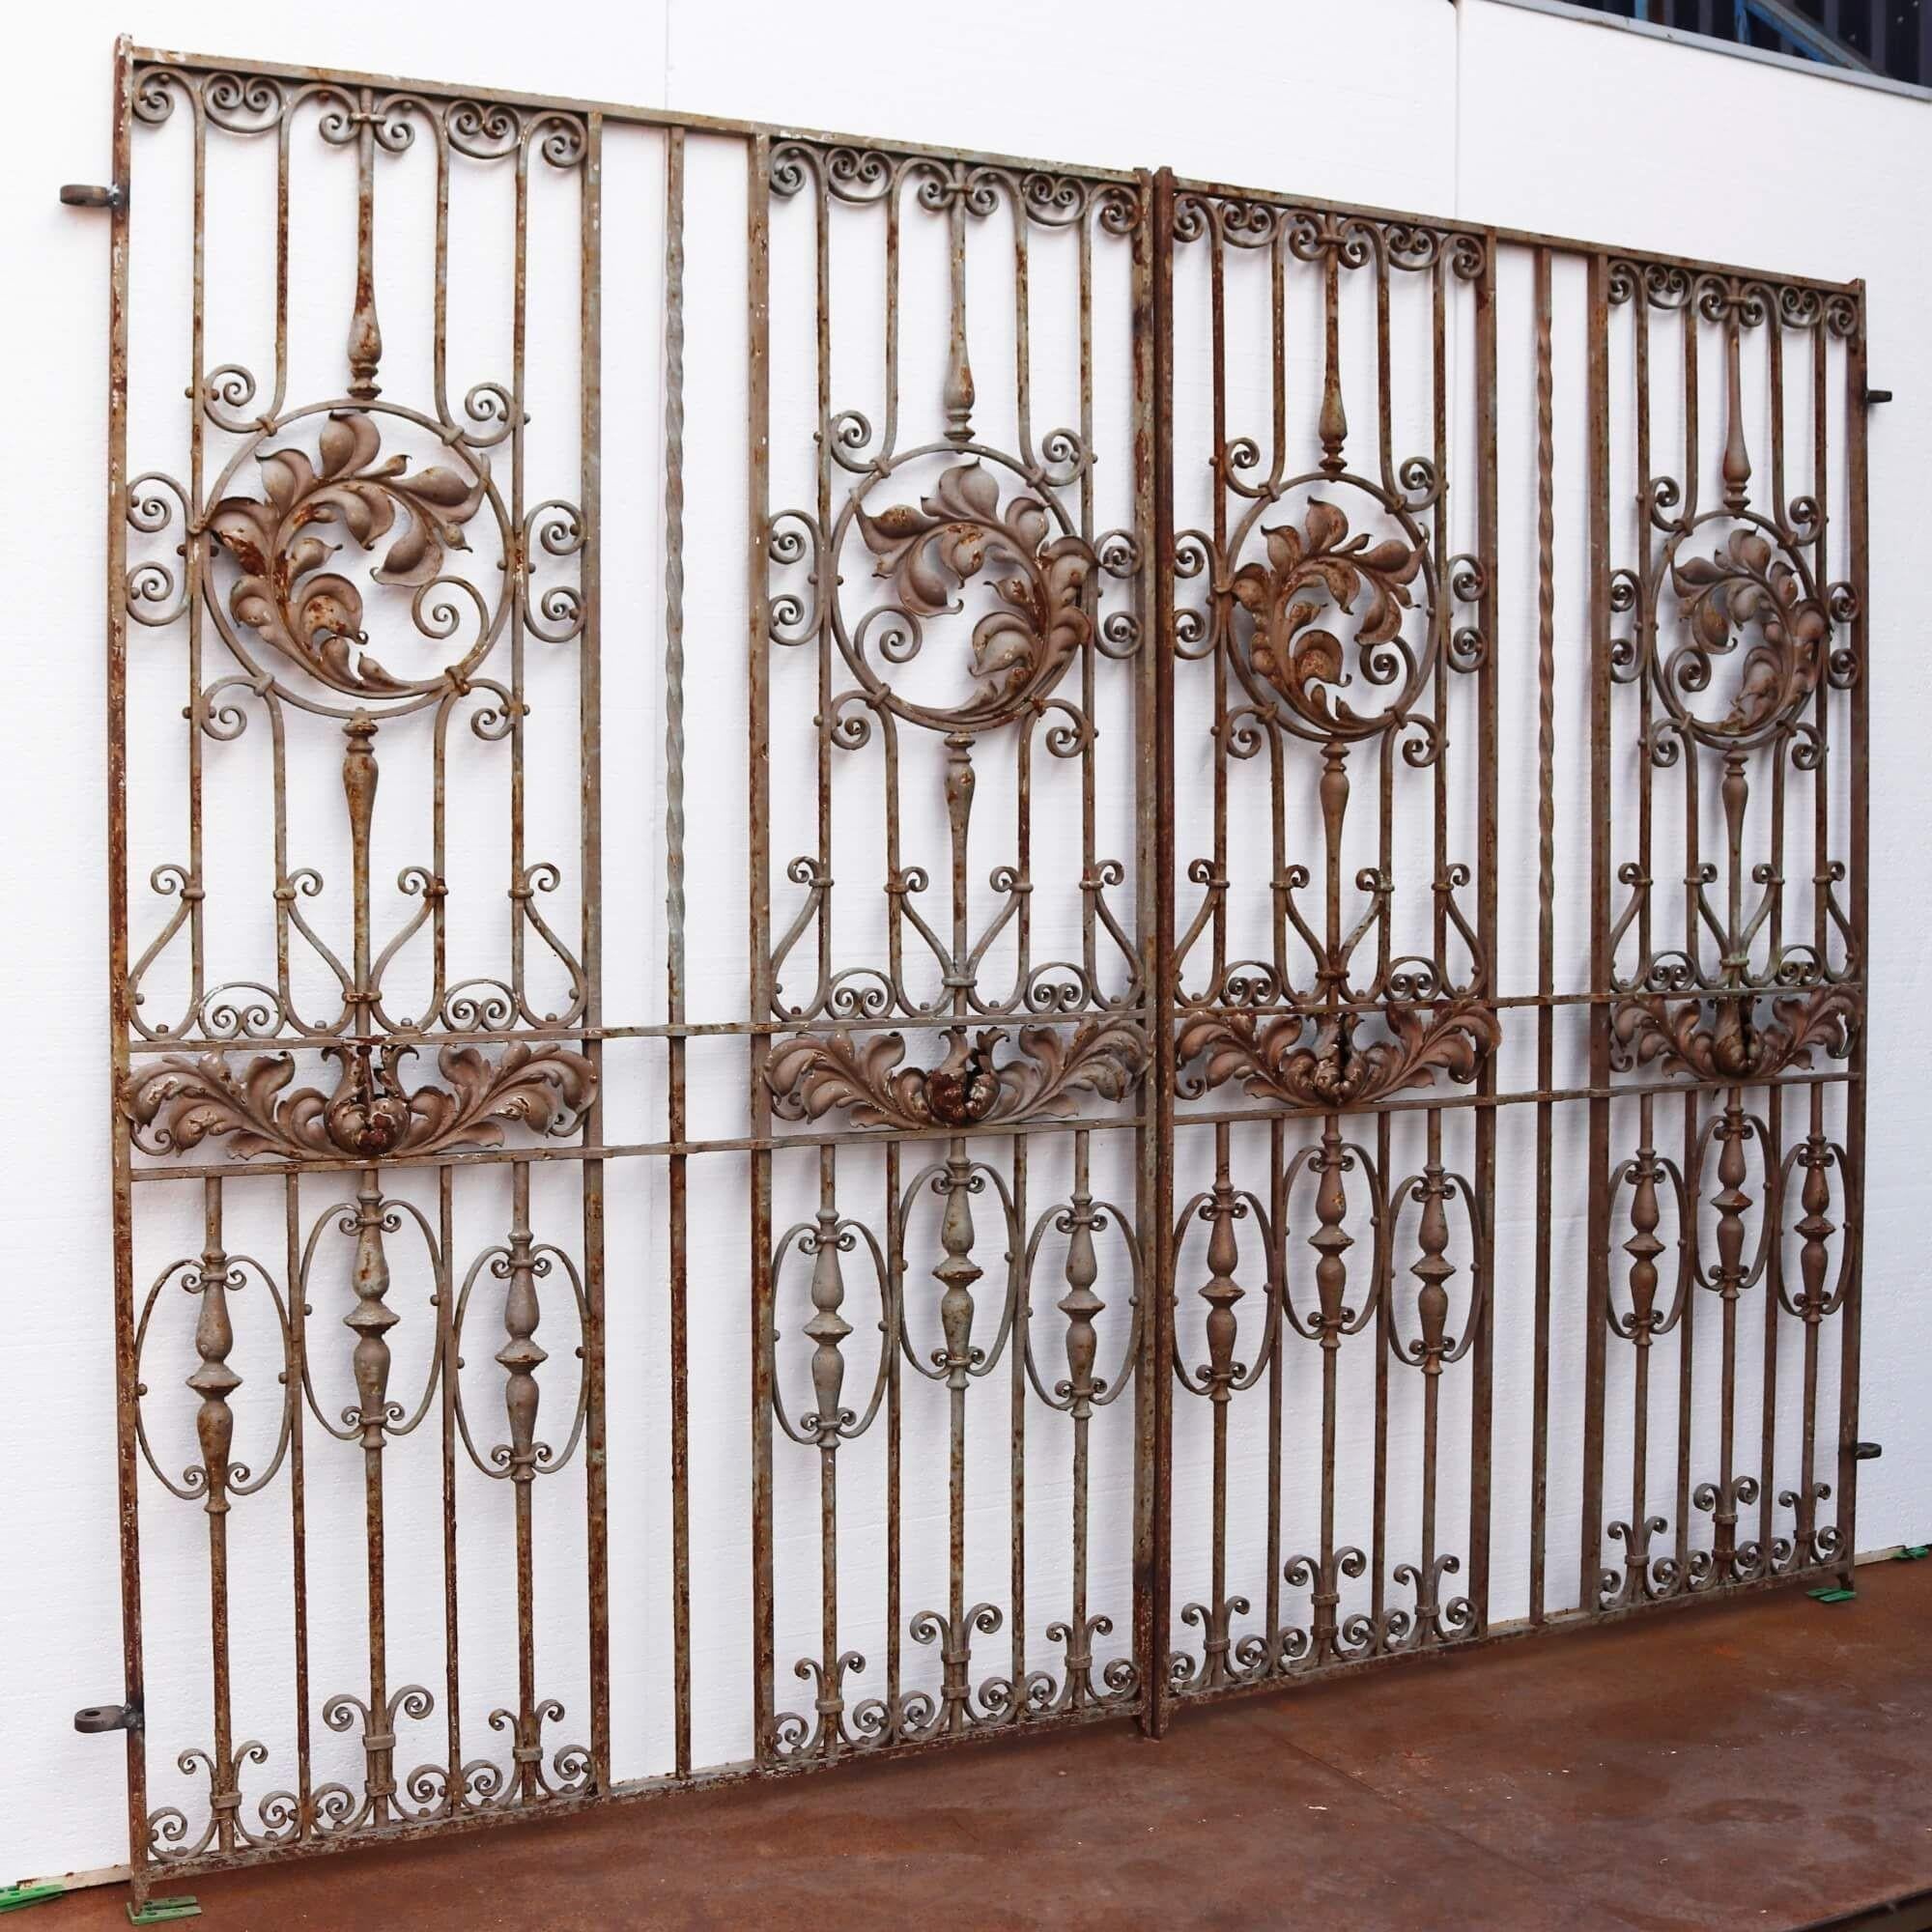 Set of French Antique Wrought Iron Driveway Gates 294cm (9’6”) In Fair Condition For Sale In Wormelow, Herefordshire